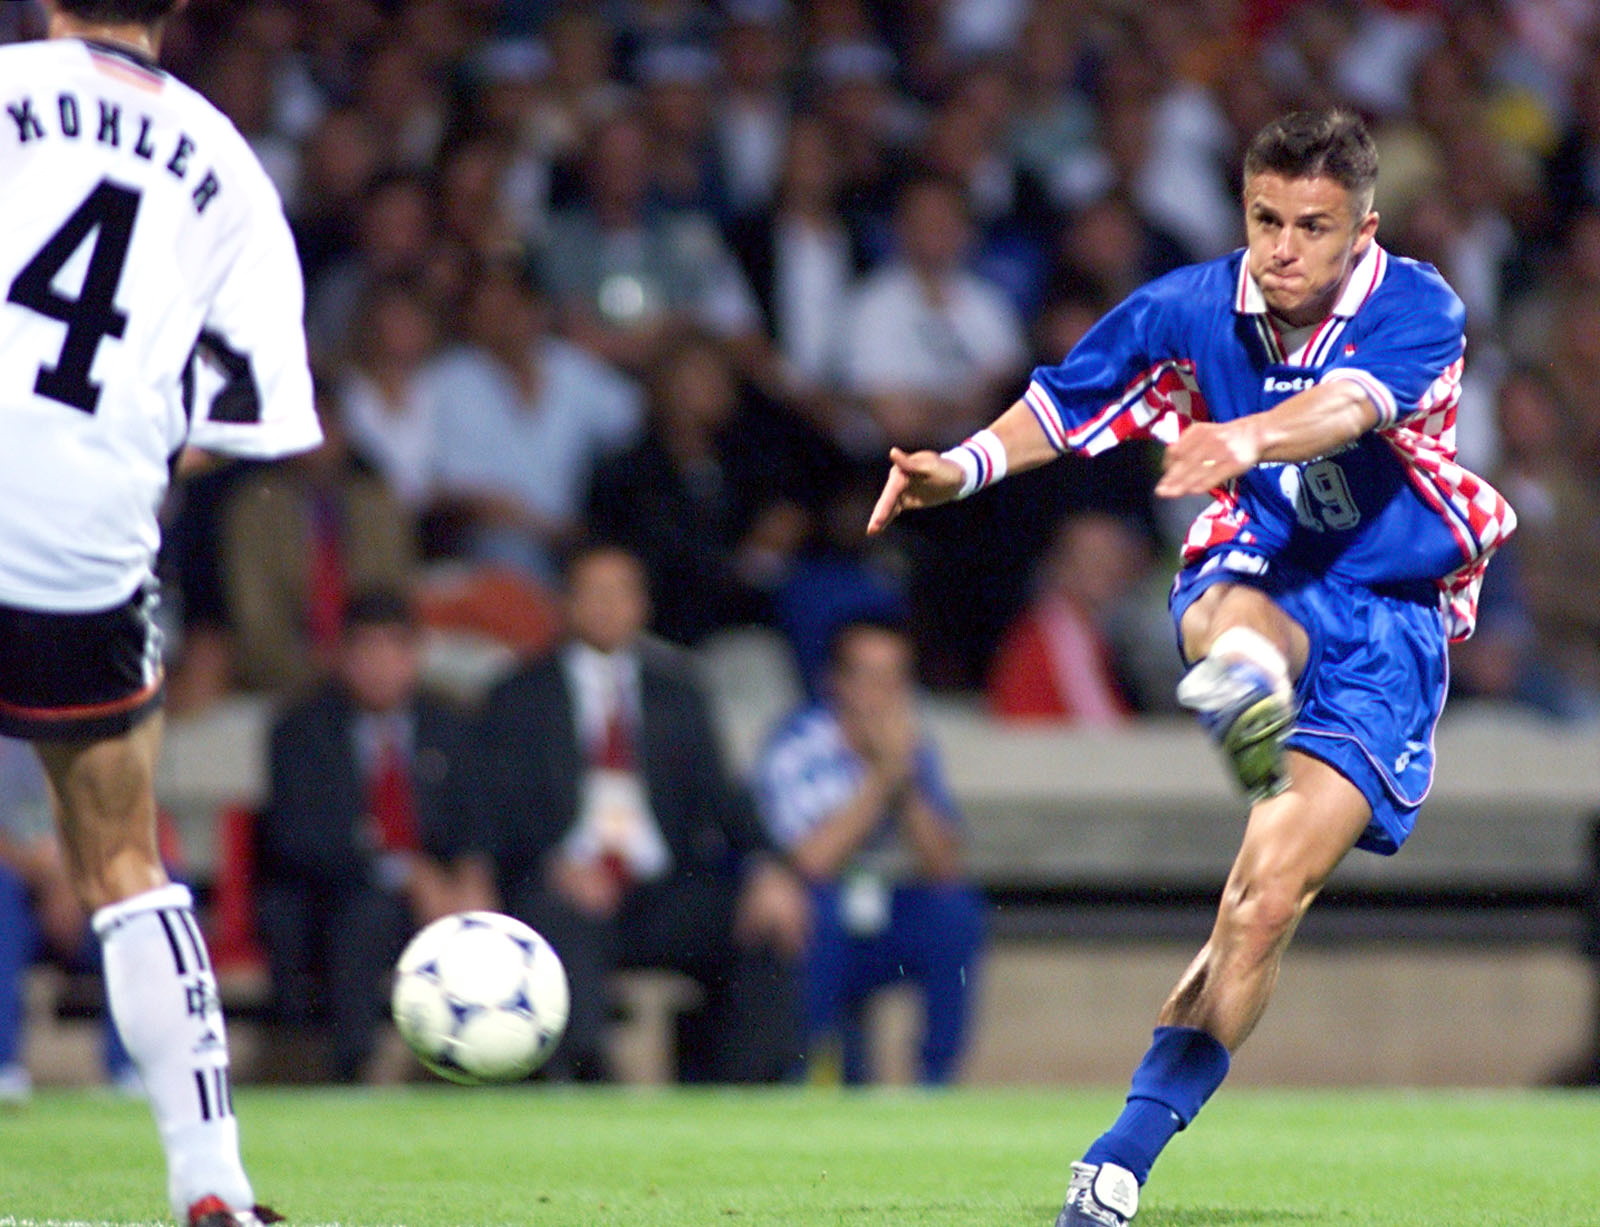 Croatian forward Goran Vlaovic kicks the ball past German defender Juergen Kohler (L) and goalkeeper Andreas Koepke (not in the picture) to score the 0-3 victory over German during the 1998 Soccer World Cup quarter-final match between Germany and Croatia 04 July at Gerland stadium in Lyon, central France. Croatia will play host France in the World Cup semi-finals in Saint-Denis 08 July. (ELECTRONIC IMAGE)   AFP PHOTO (Photo by GERARD CERLES / AFP)